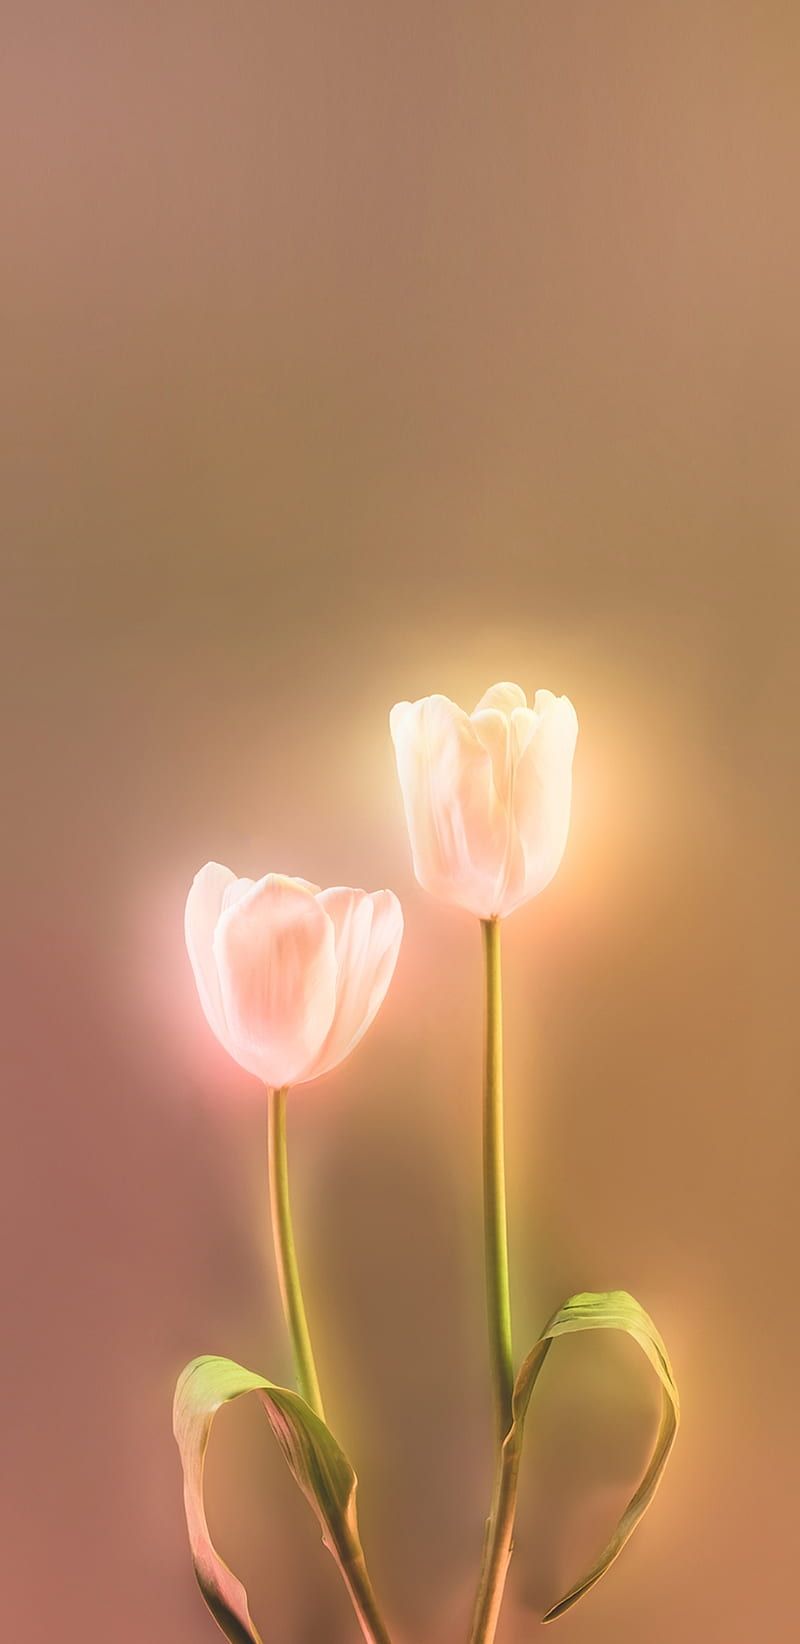 Two pink tulips on a brown background - Tulip